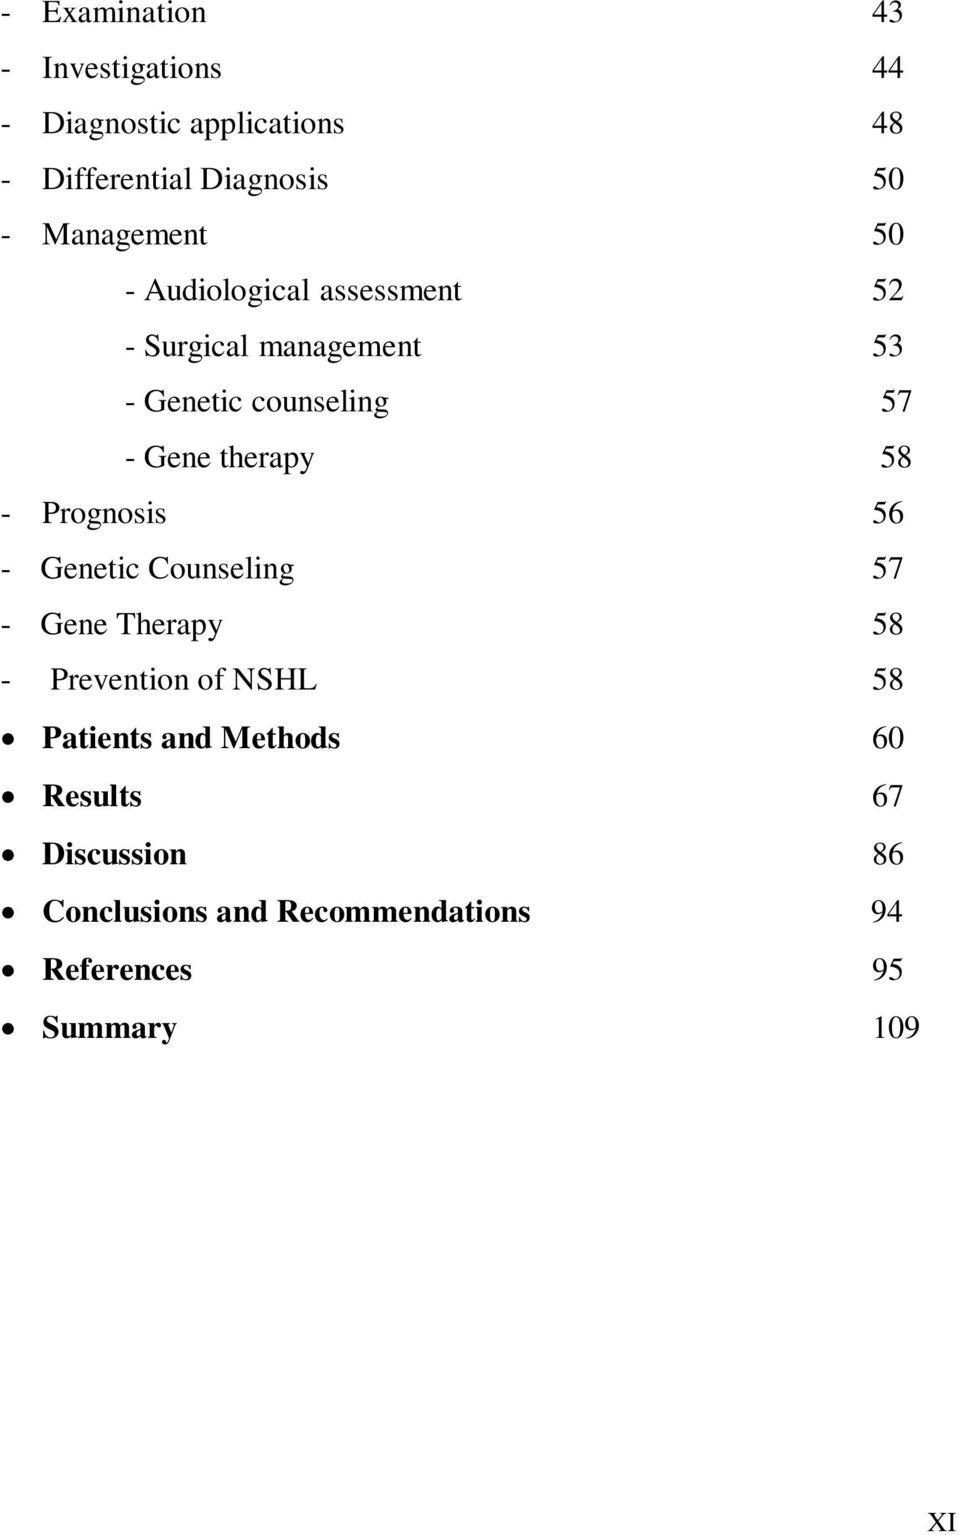 therapy 58 - Prognosis 56 - Genetic Counseling 57 - Gene Therapy 58 - Prevention of NSHL 58